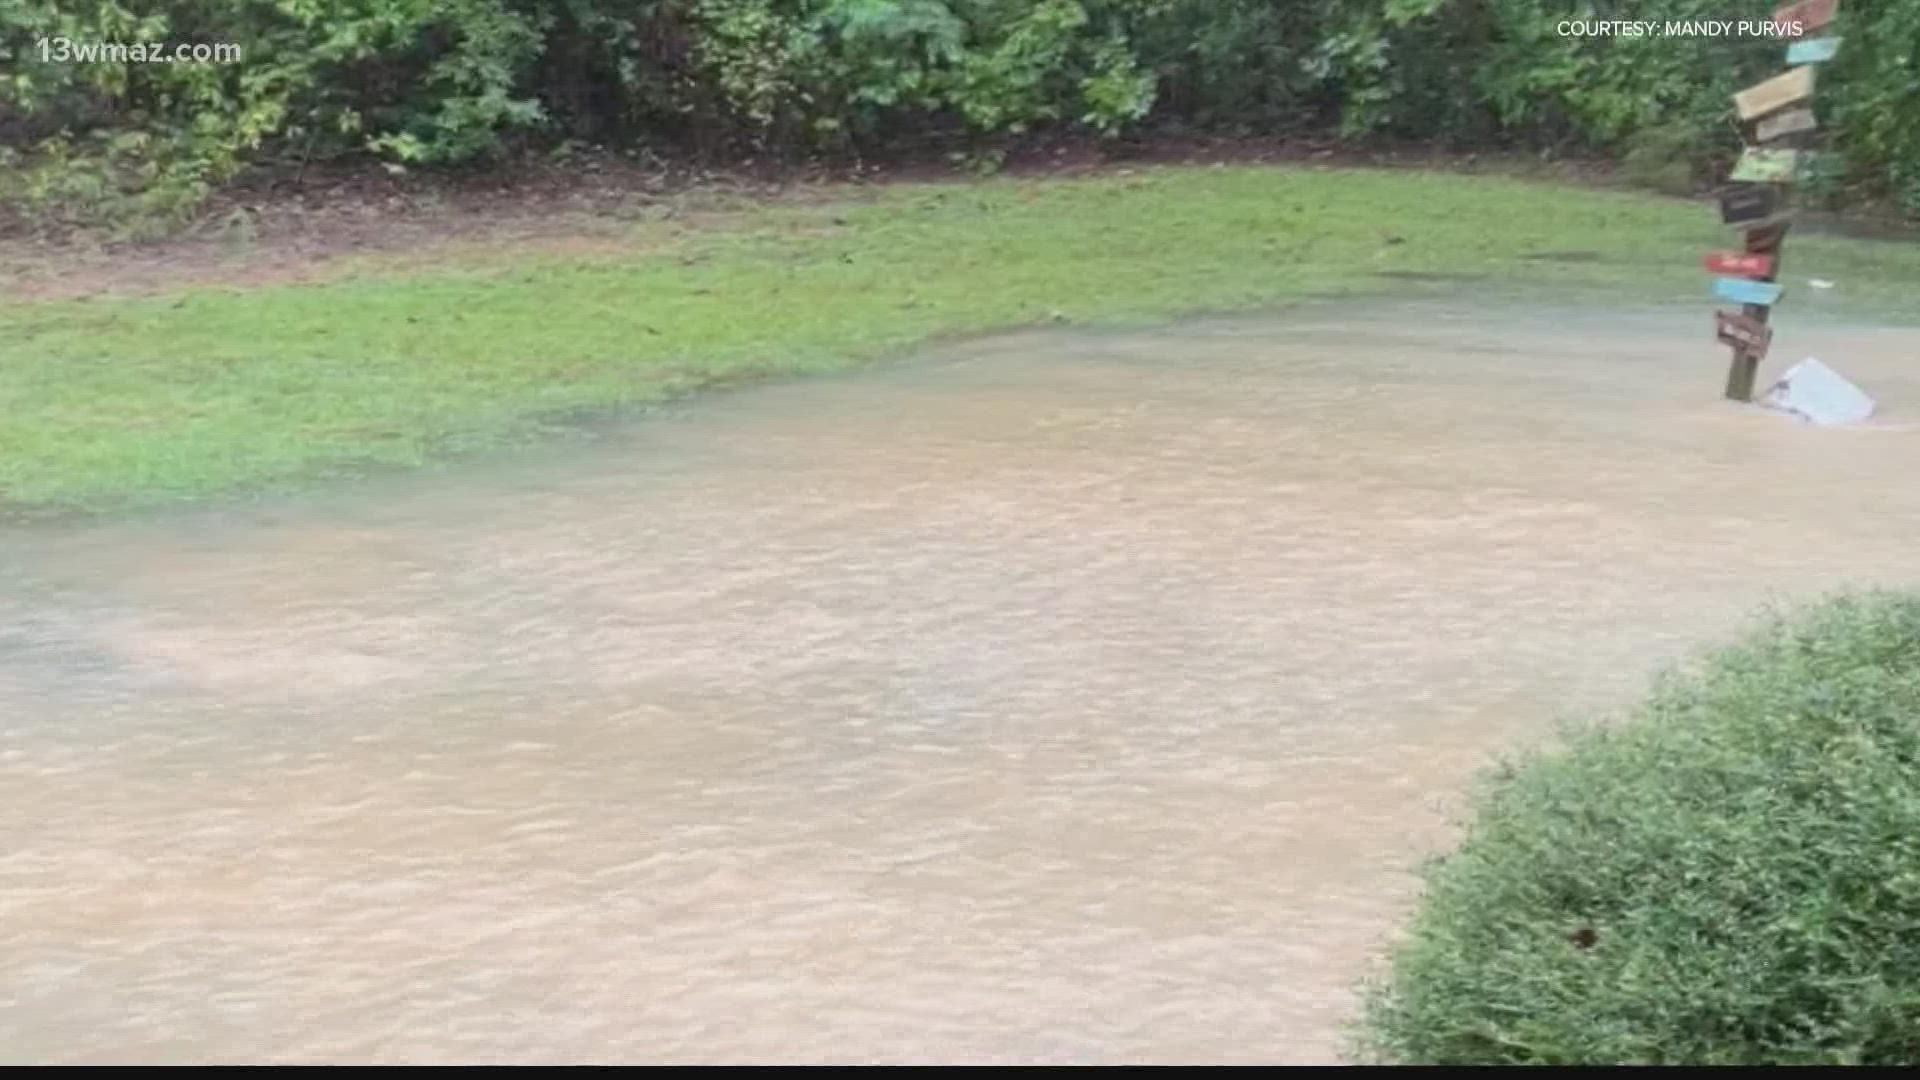 Water running through a south Bibb County backyard after a storm is a common issue in the area, and the Macon Water Authority already has some solutions.